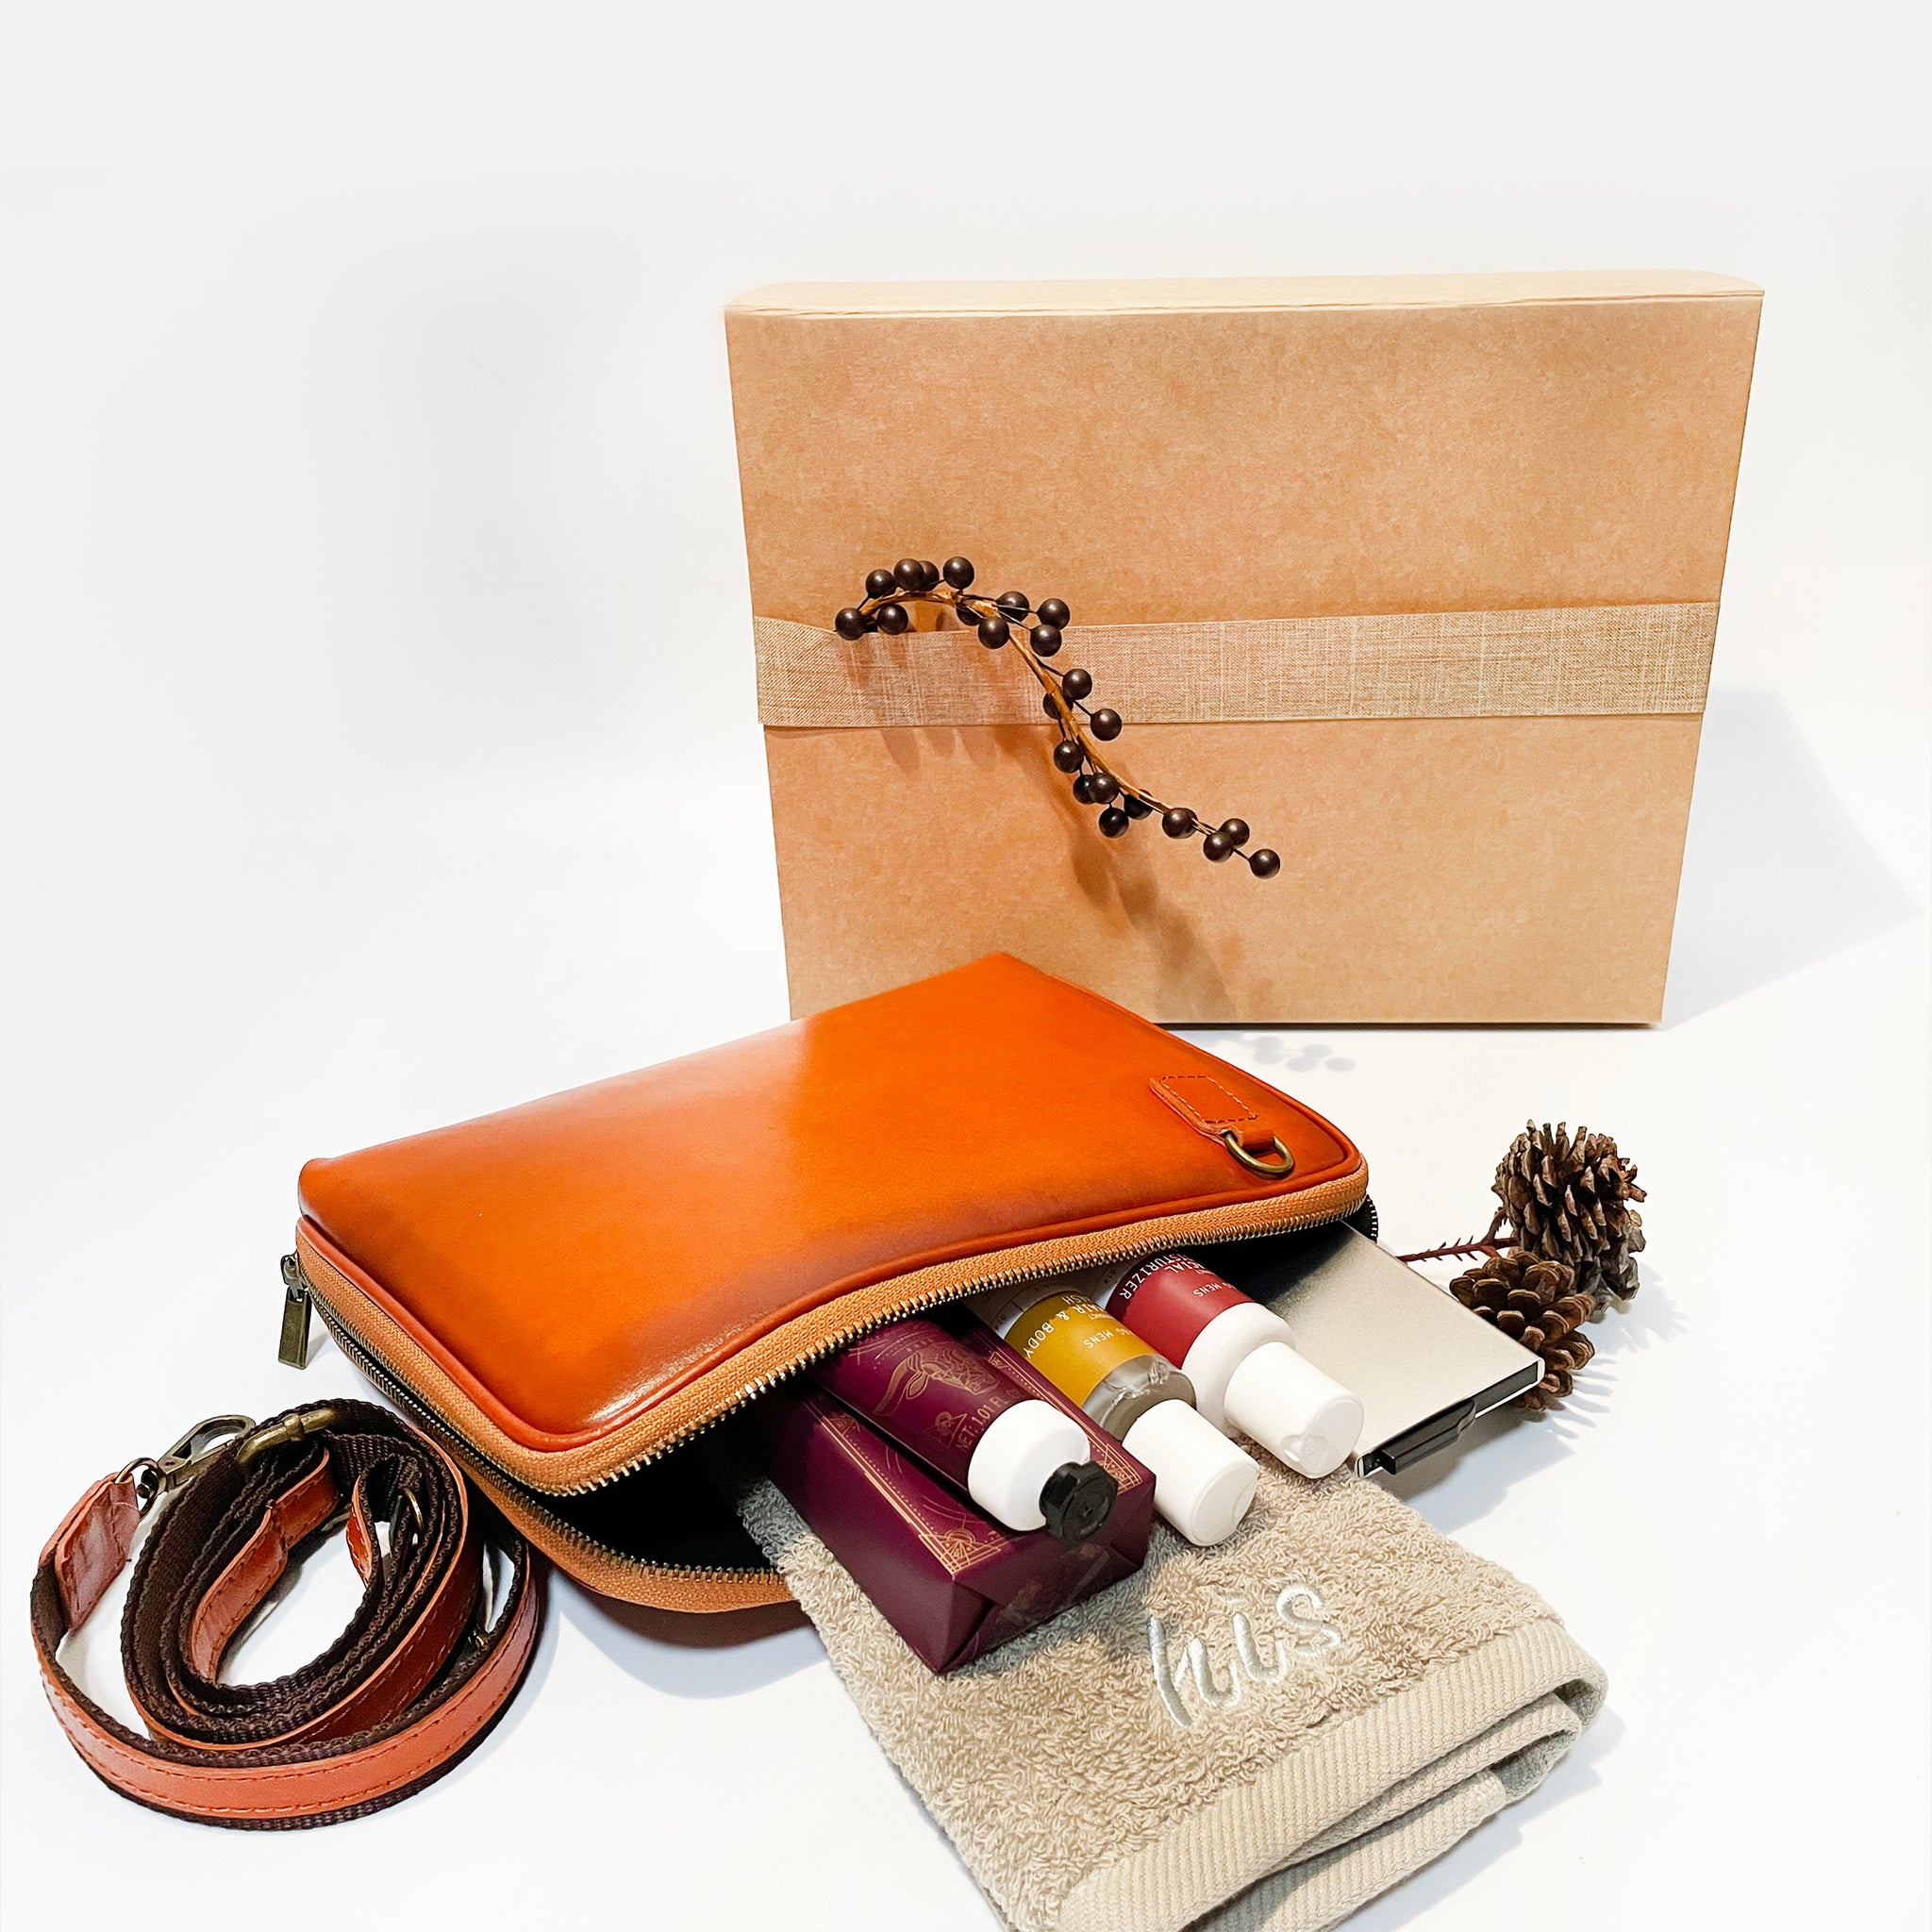 His Travel Gift Box - Benzie Gifts